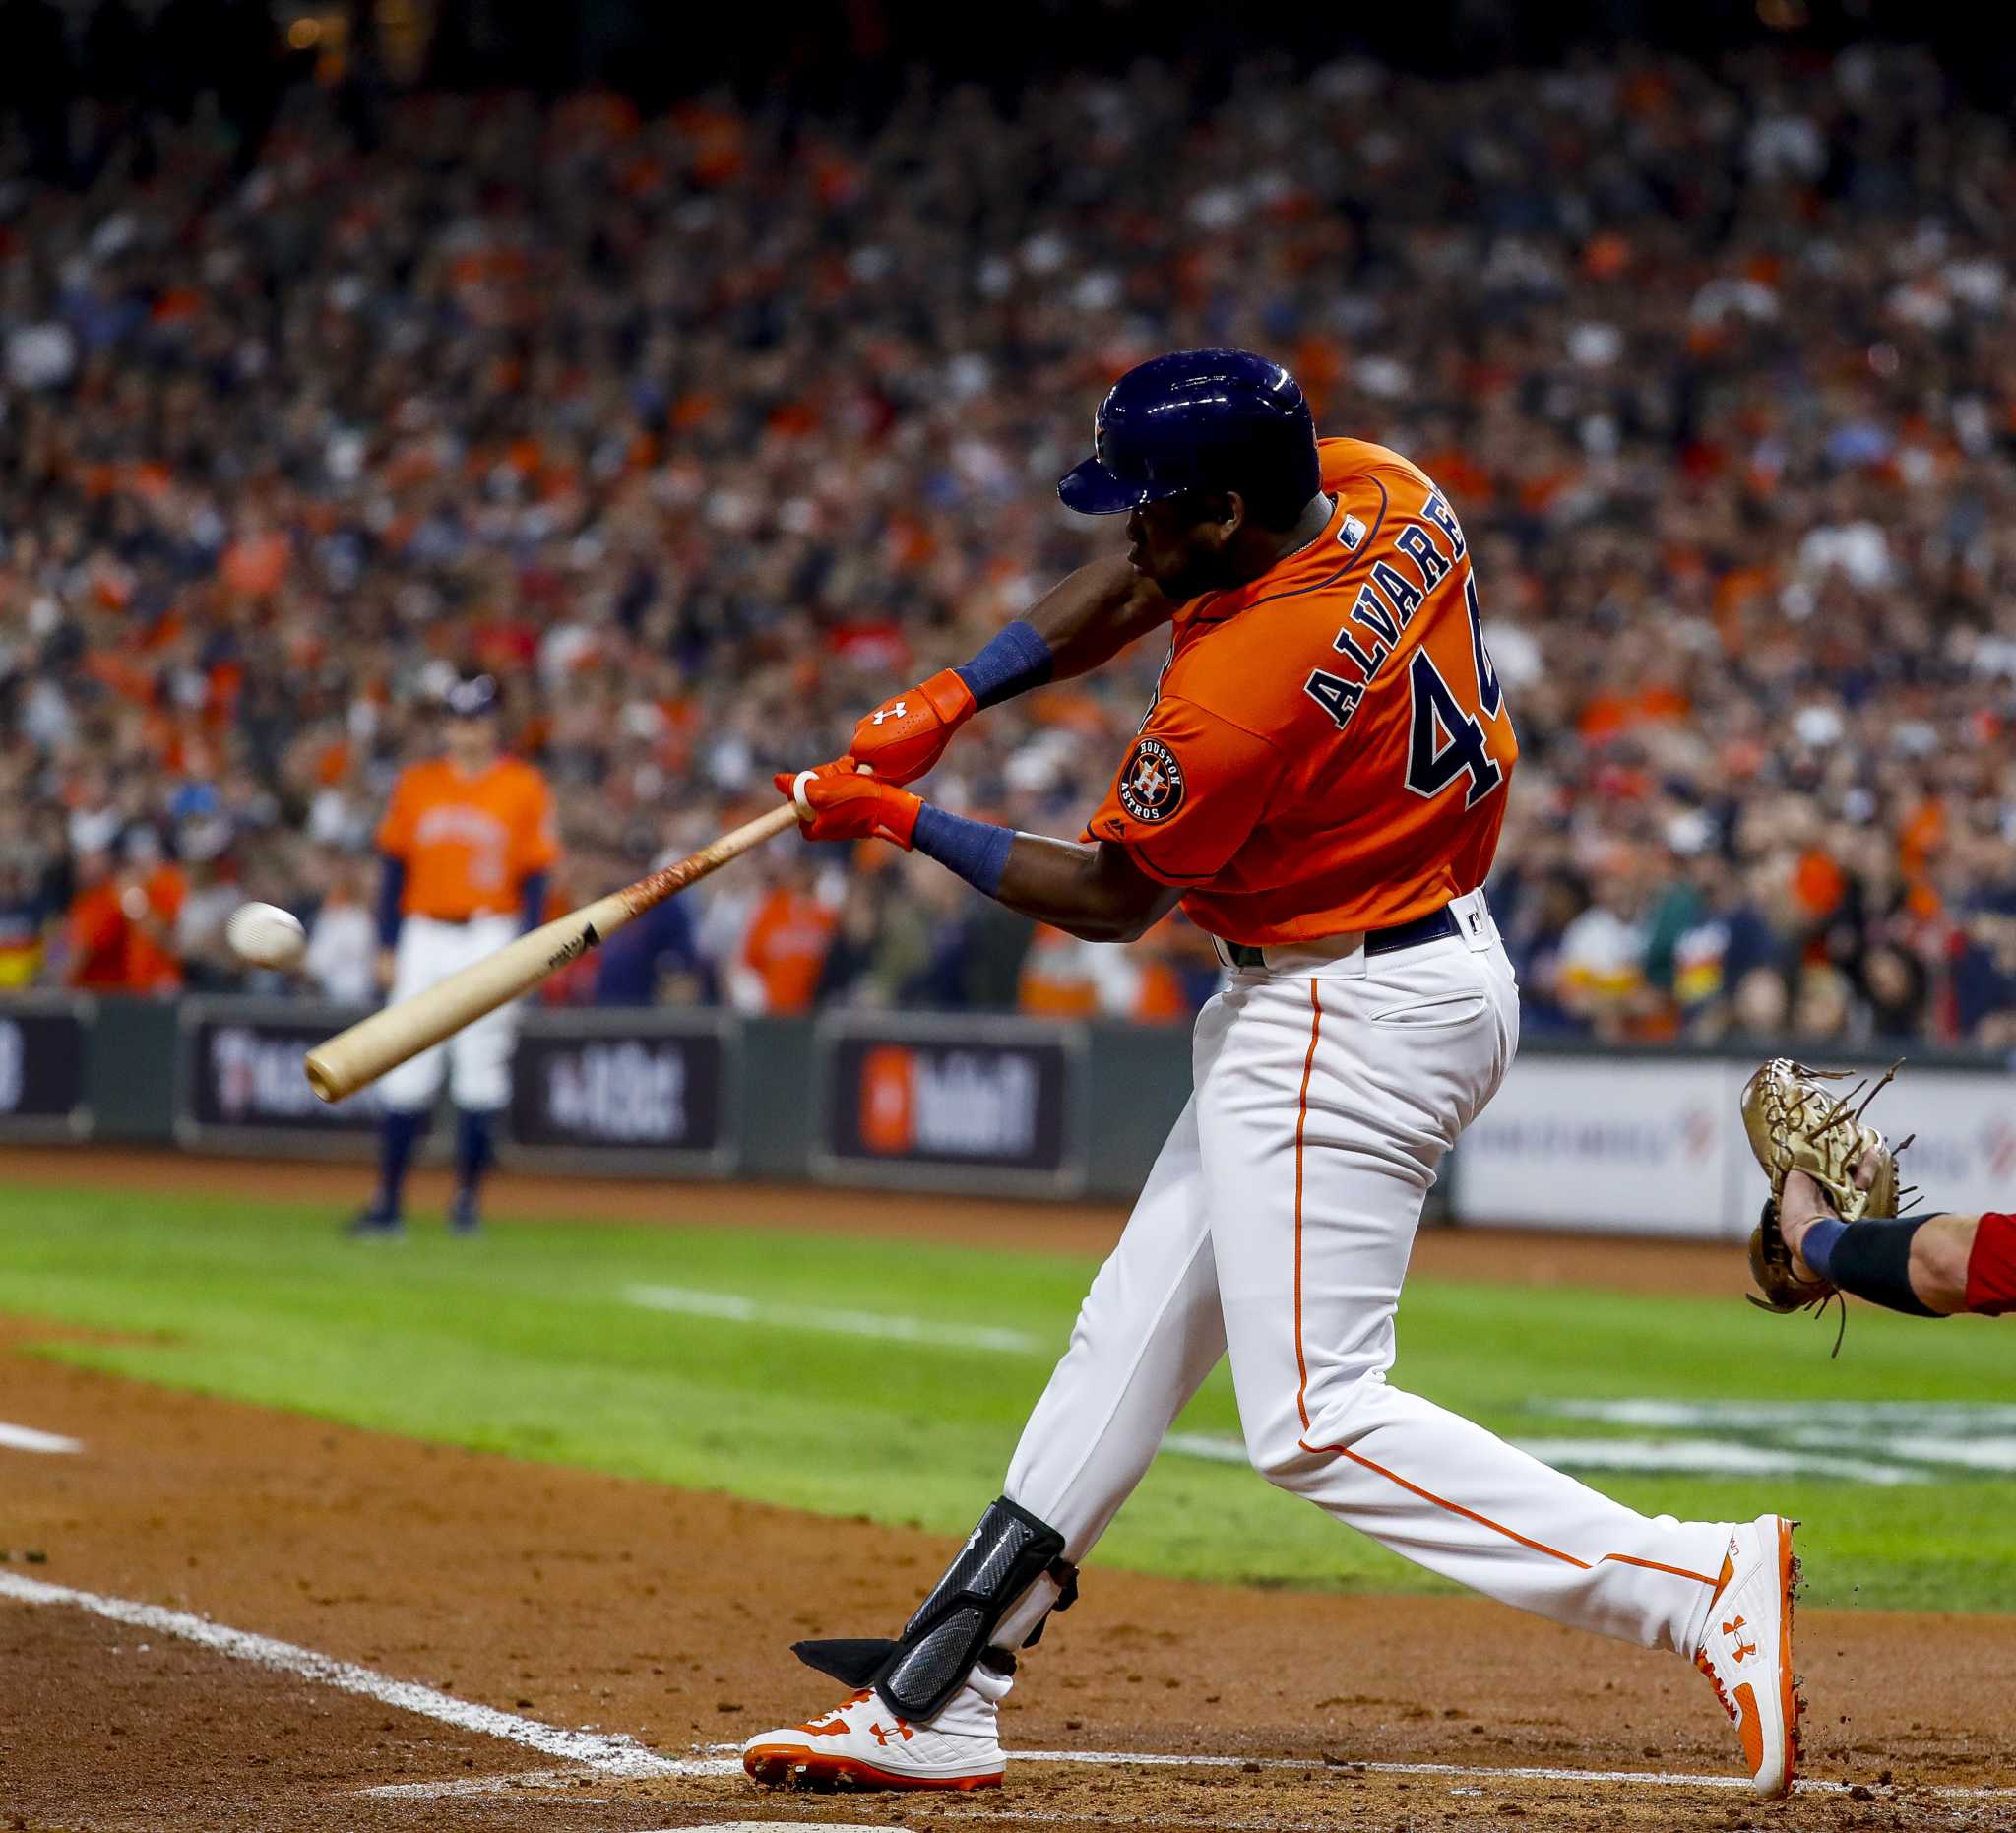 Yordan Alvarez changes Astros' mood, fate with one swing in Game 1